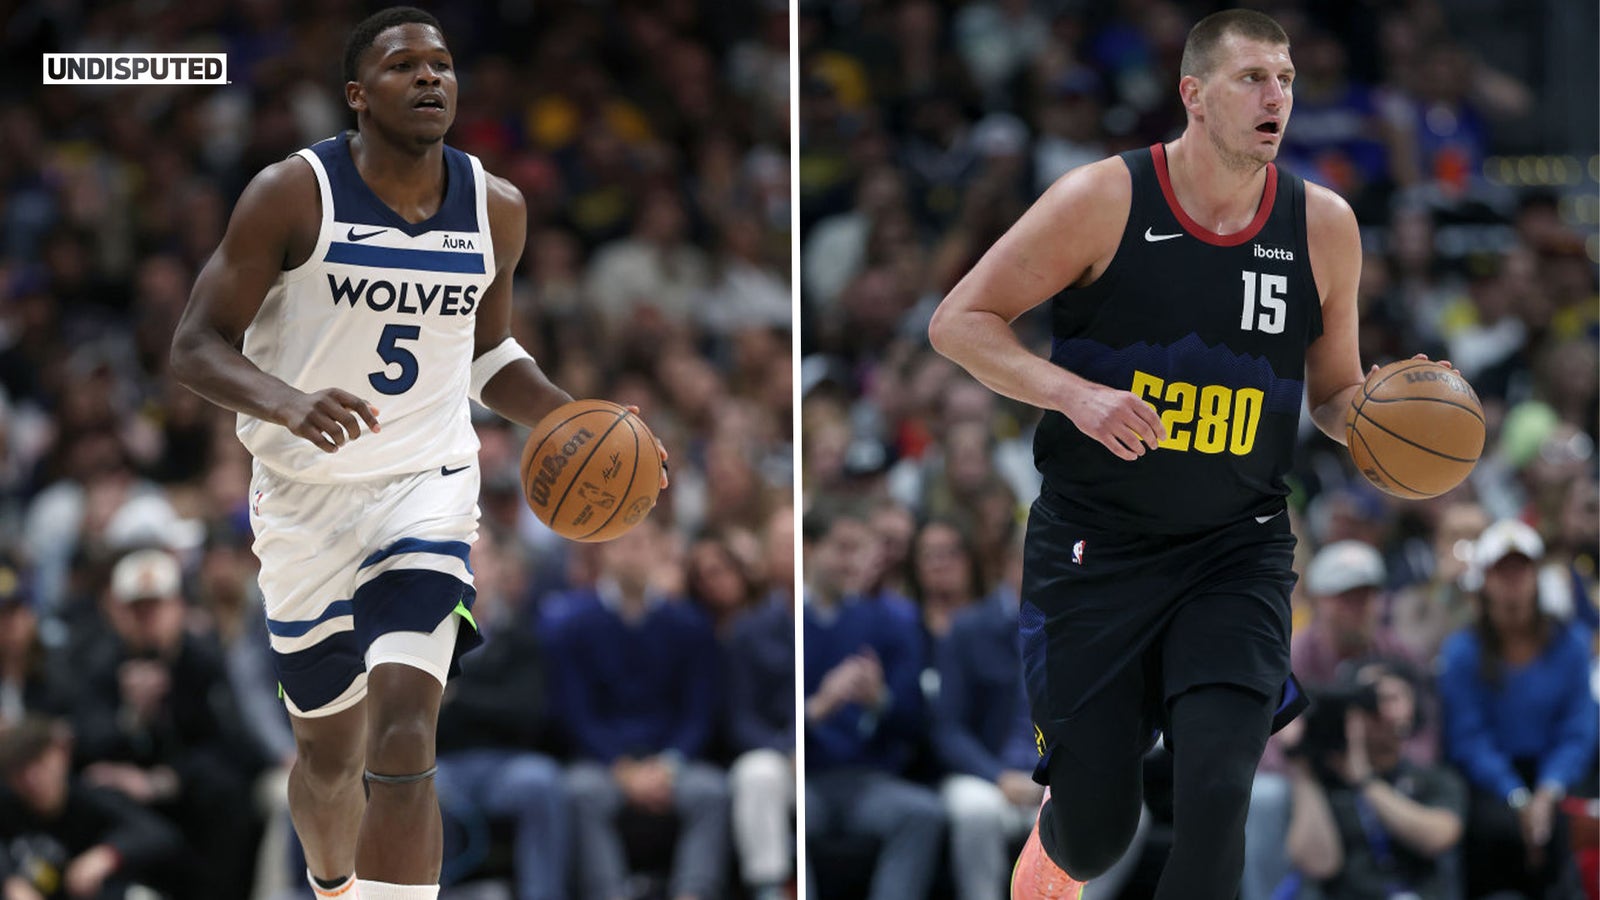 Anthony Edwards, T-Wolves blowout Nuggets 106-80, is Denver done down 0-2?